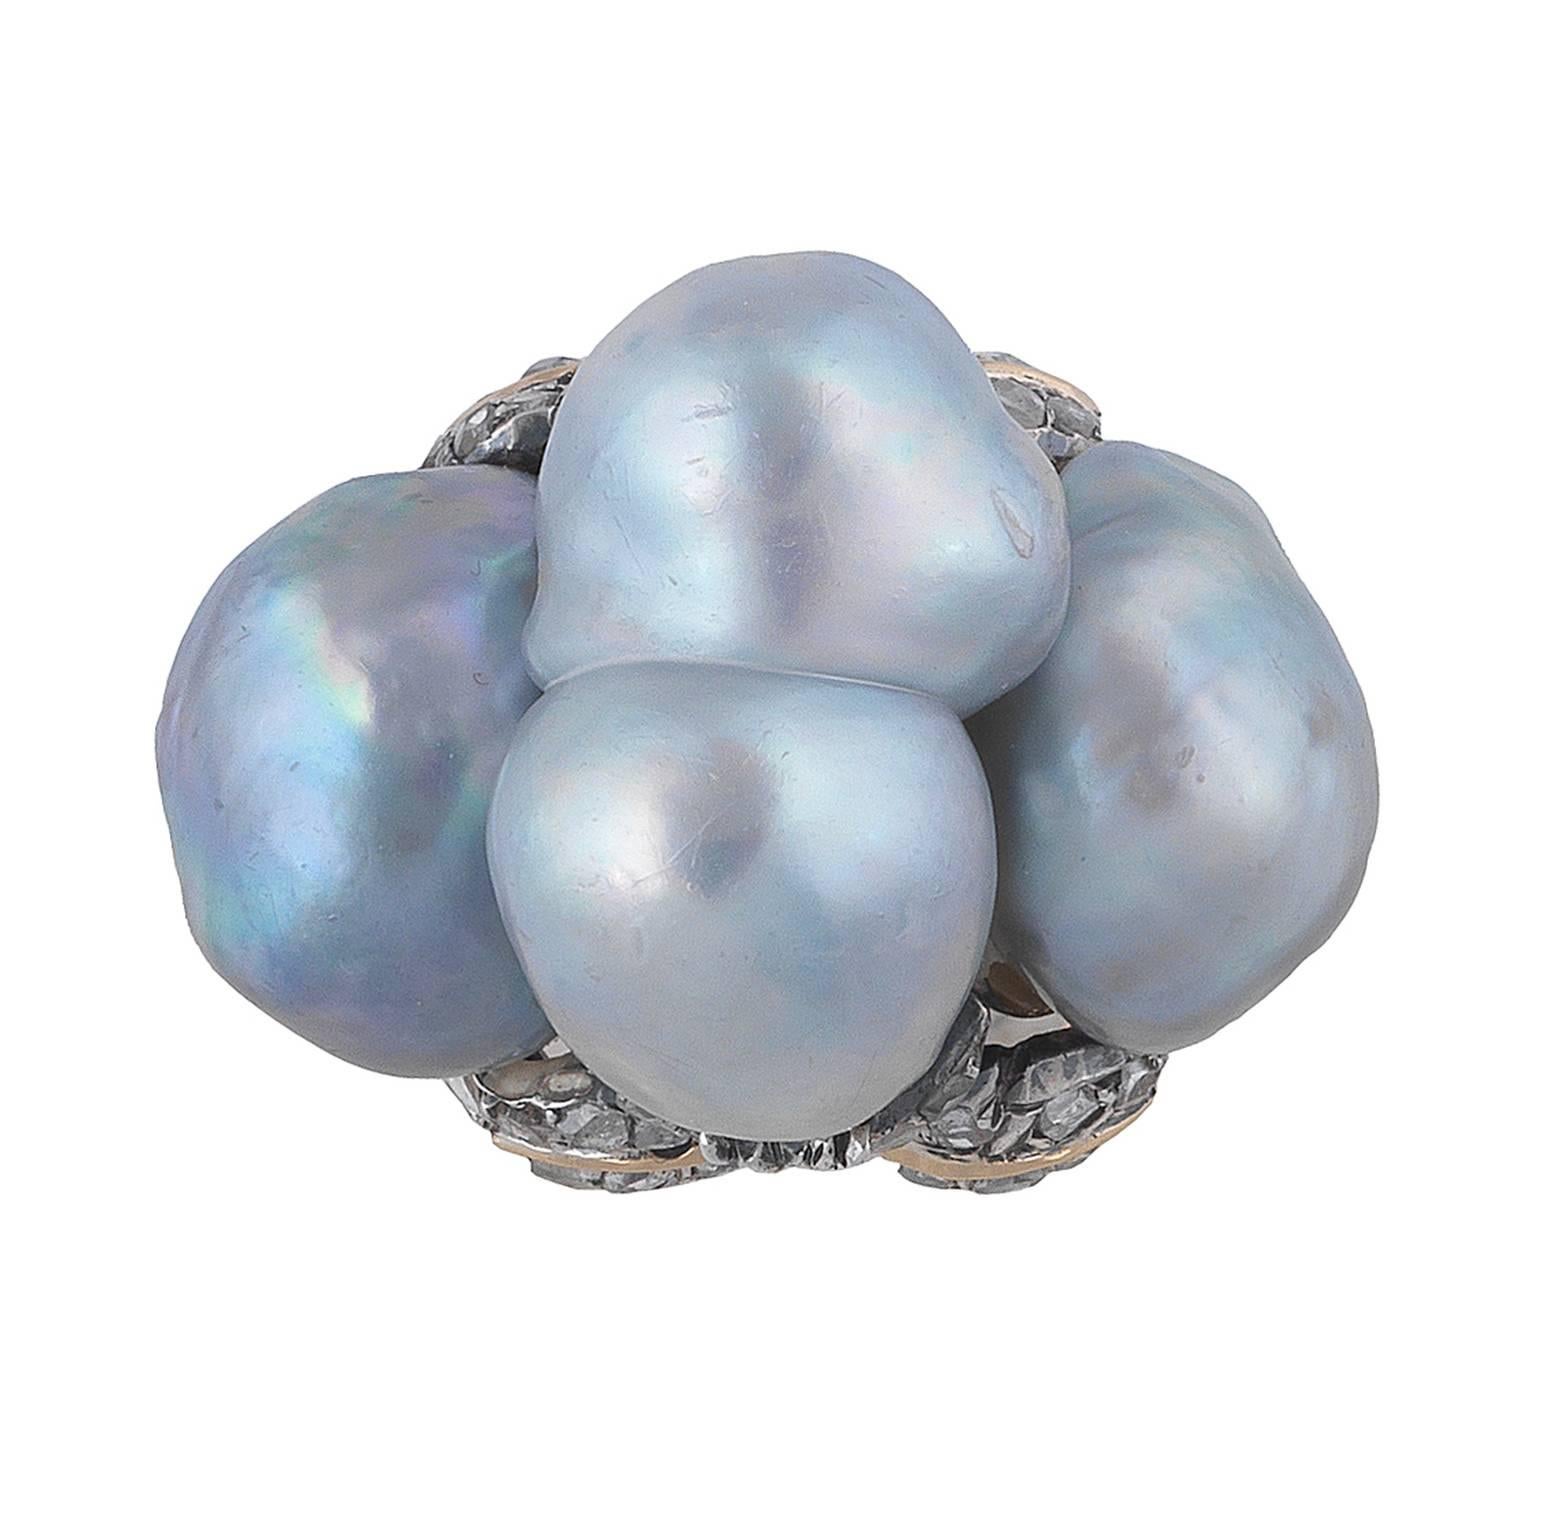 PLEASE NOTE: OUR PRICE IS FULLY INCLUSIVE OF SHIPPING, IMPORTATION TAXES & DUTIES.

Designed as a dome featuring three grey baroque pearls measuring approx. 17 x 10 mm (the central one) and 12 x 10 mm (the two at the sides) to a stylized flowers